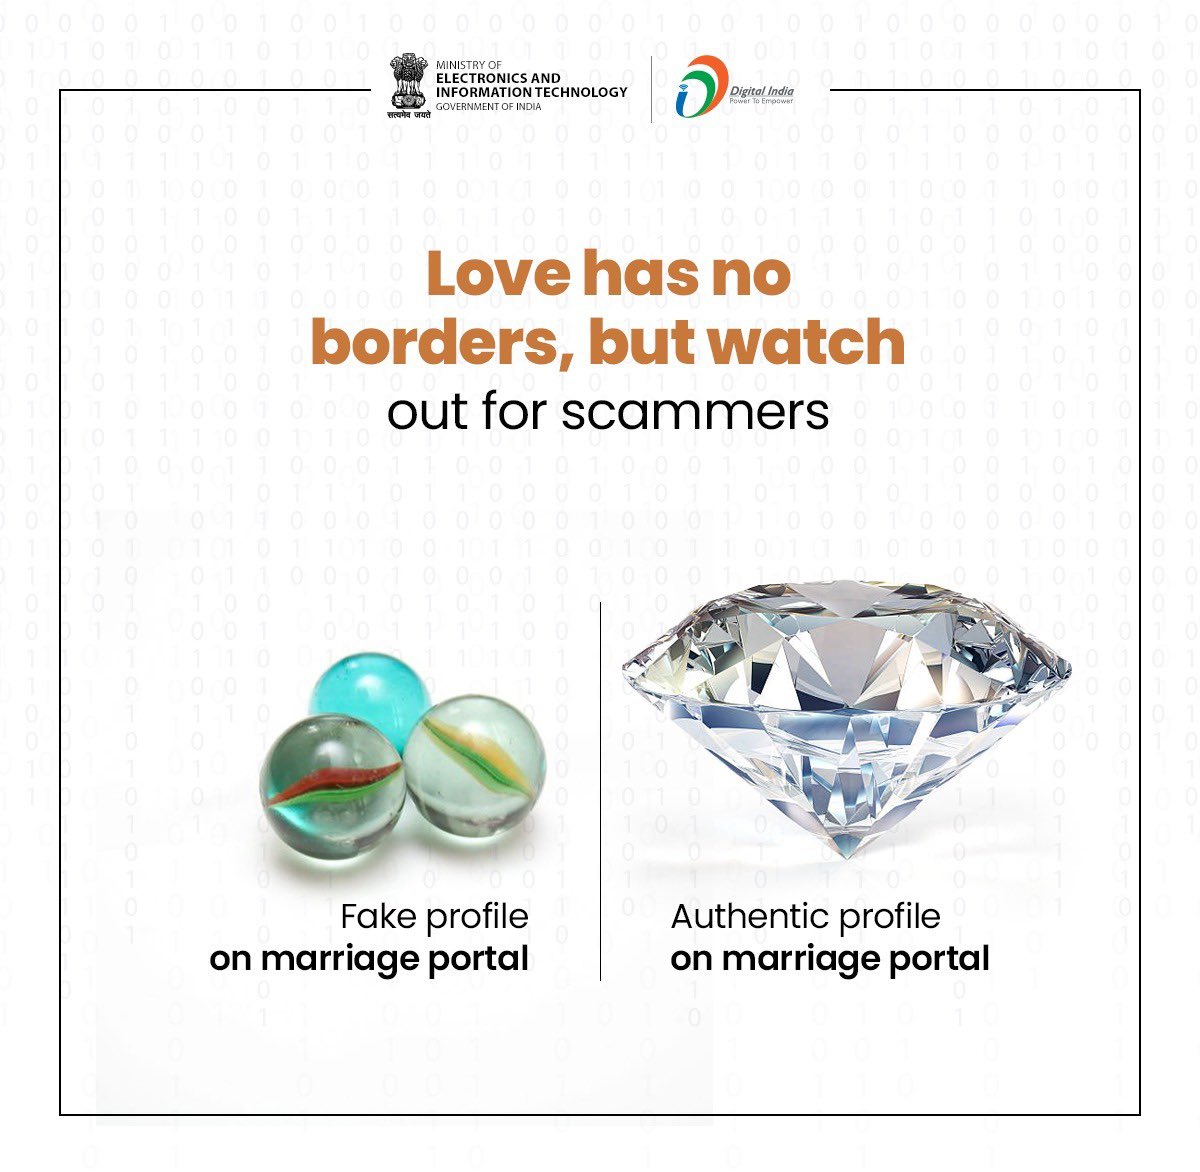 On dating & marriage apps, verify photos, look for inconsistencies in information, and avoid overly generic or scripted messages. Protect your feelings and your money. Stay sharp and safe. 🛡️🔐#DataSecurity #CyberSafetyTips #DigitalIndia